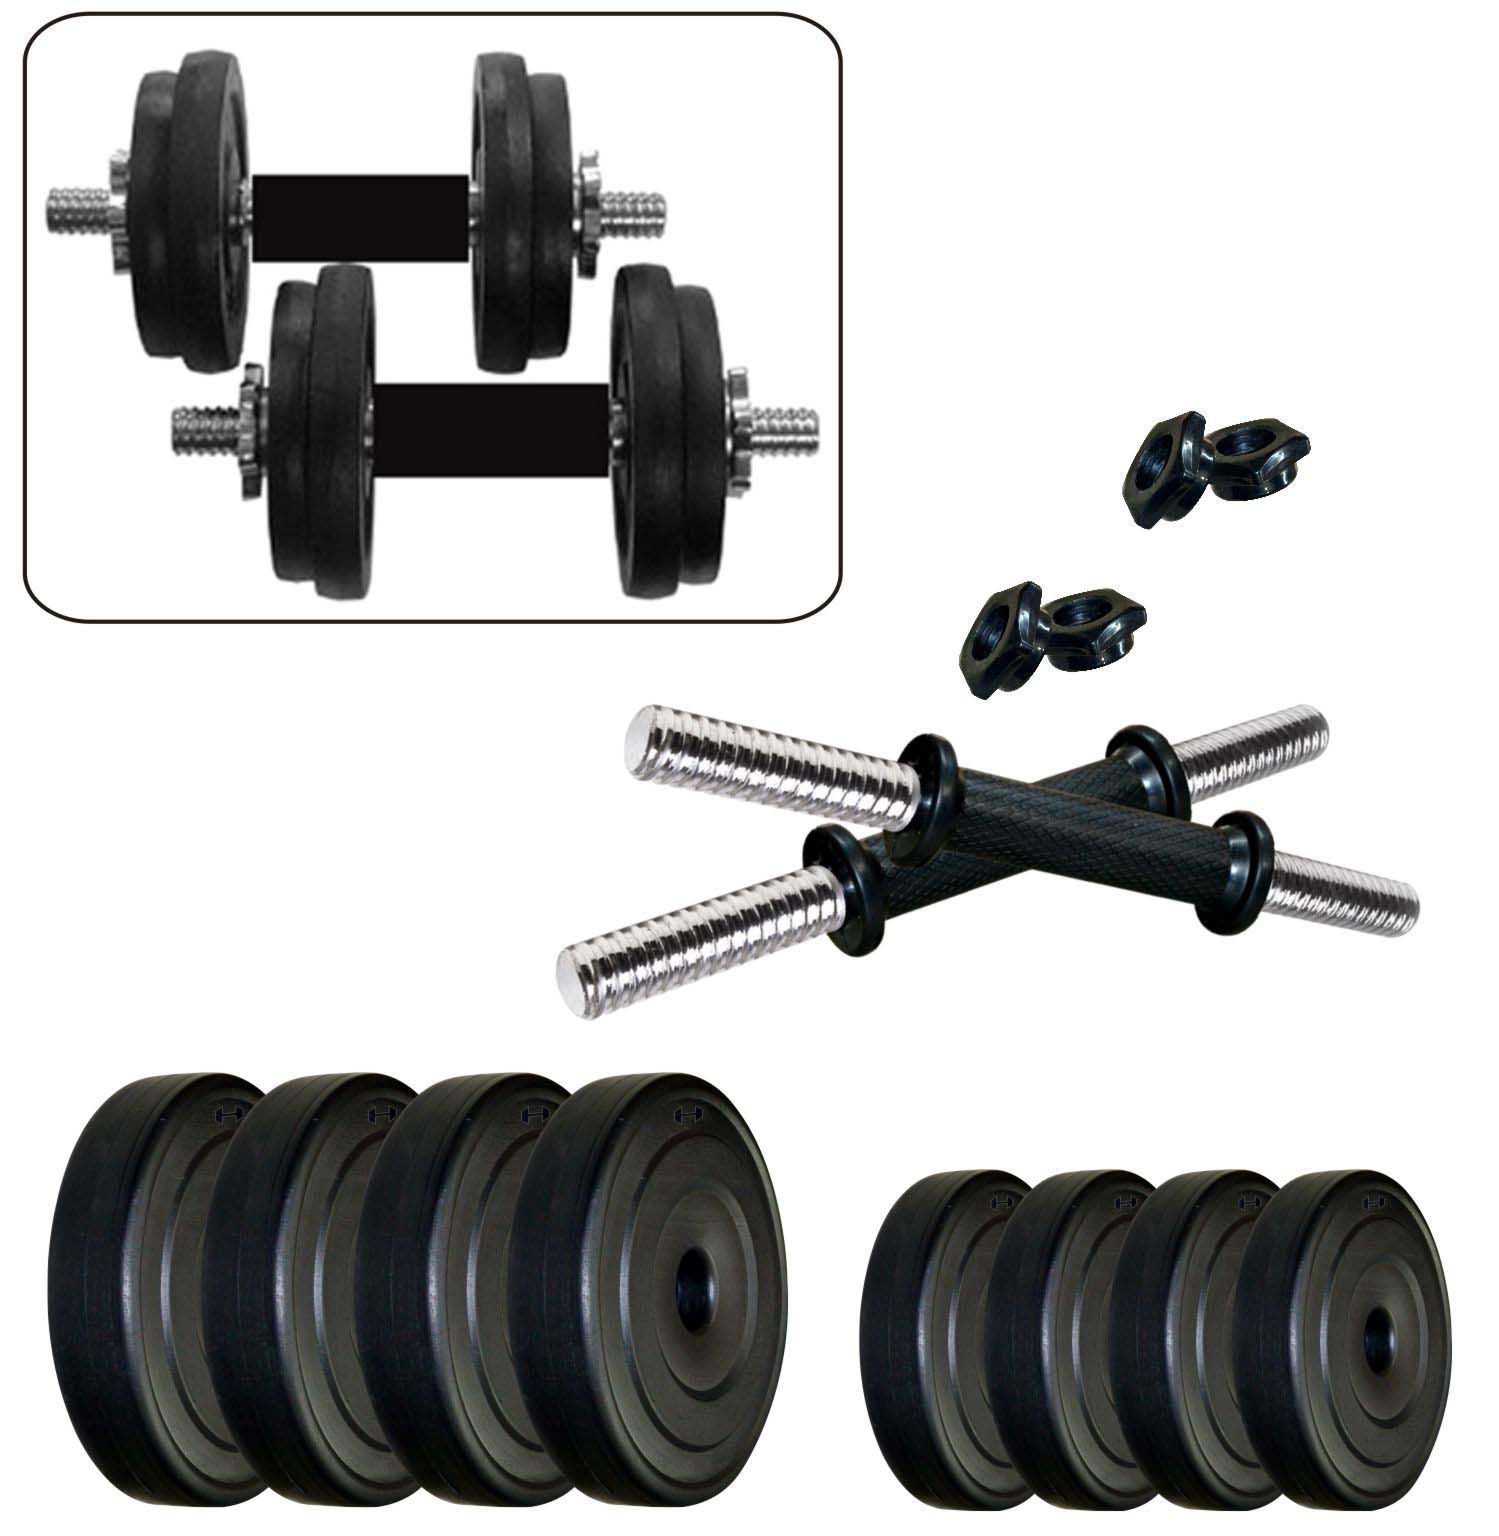 easy method to have a gym plates right at home